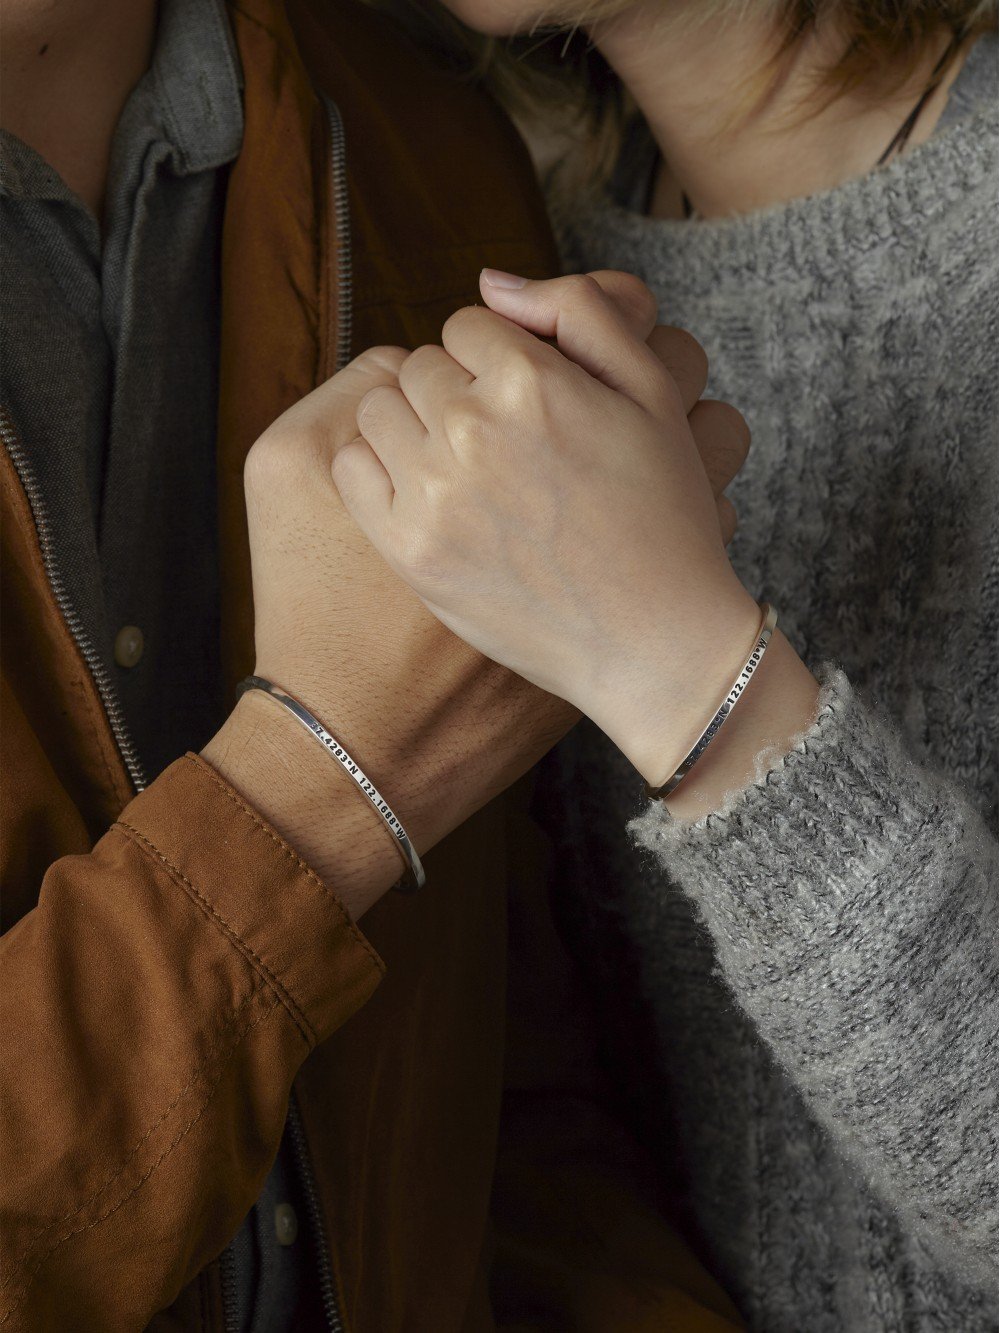 Couple Magnet Bracelet Minimalist Lovers Matching Friendship Bracelets   Couple Magnetic Distance Bracelet  Valentines Day Gift  Gift For Her   Gift For Him  VivaGifts